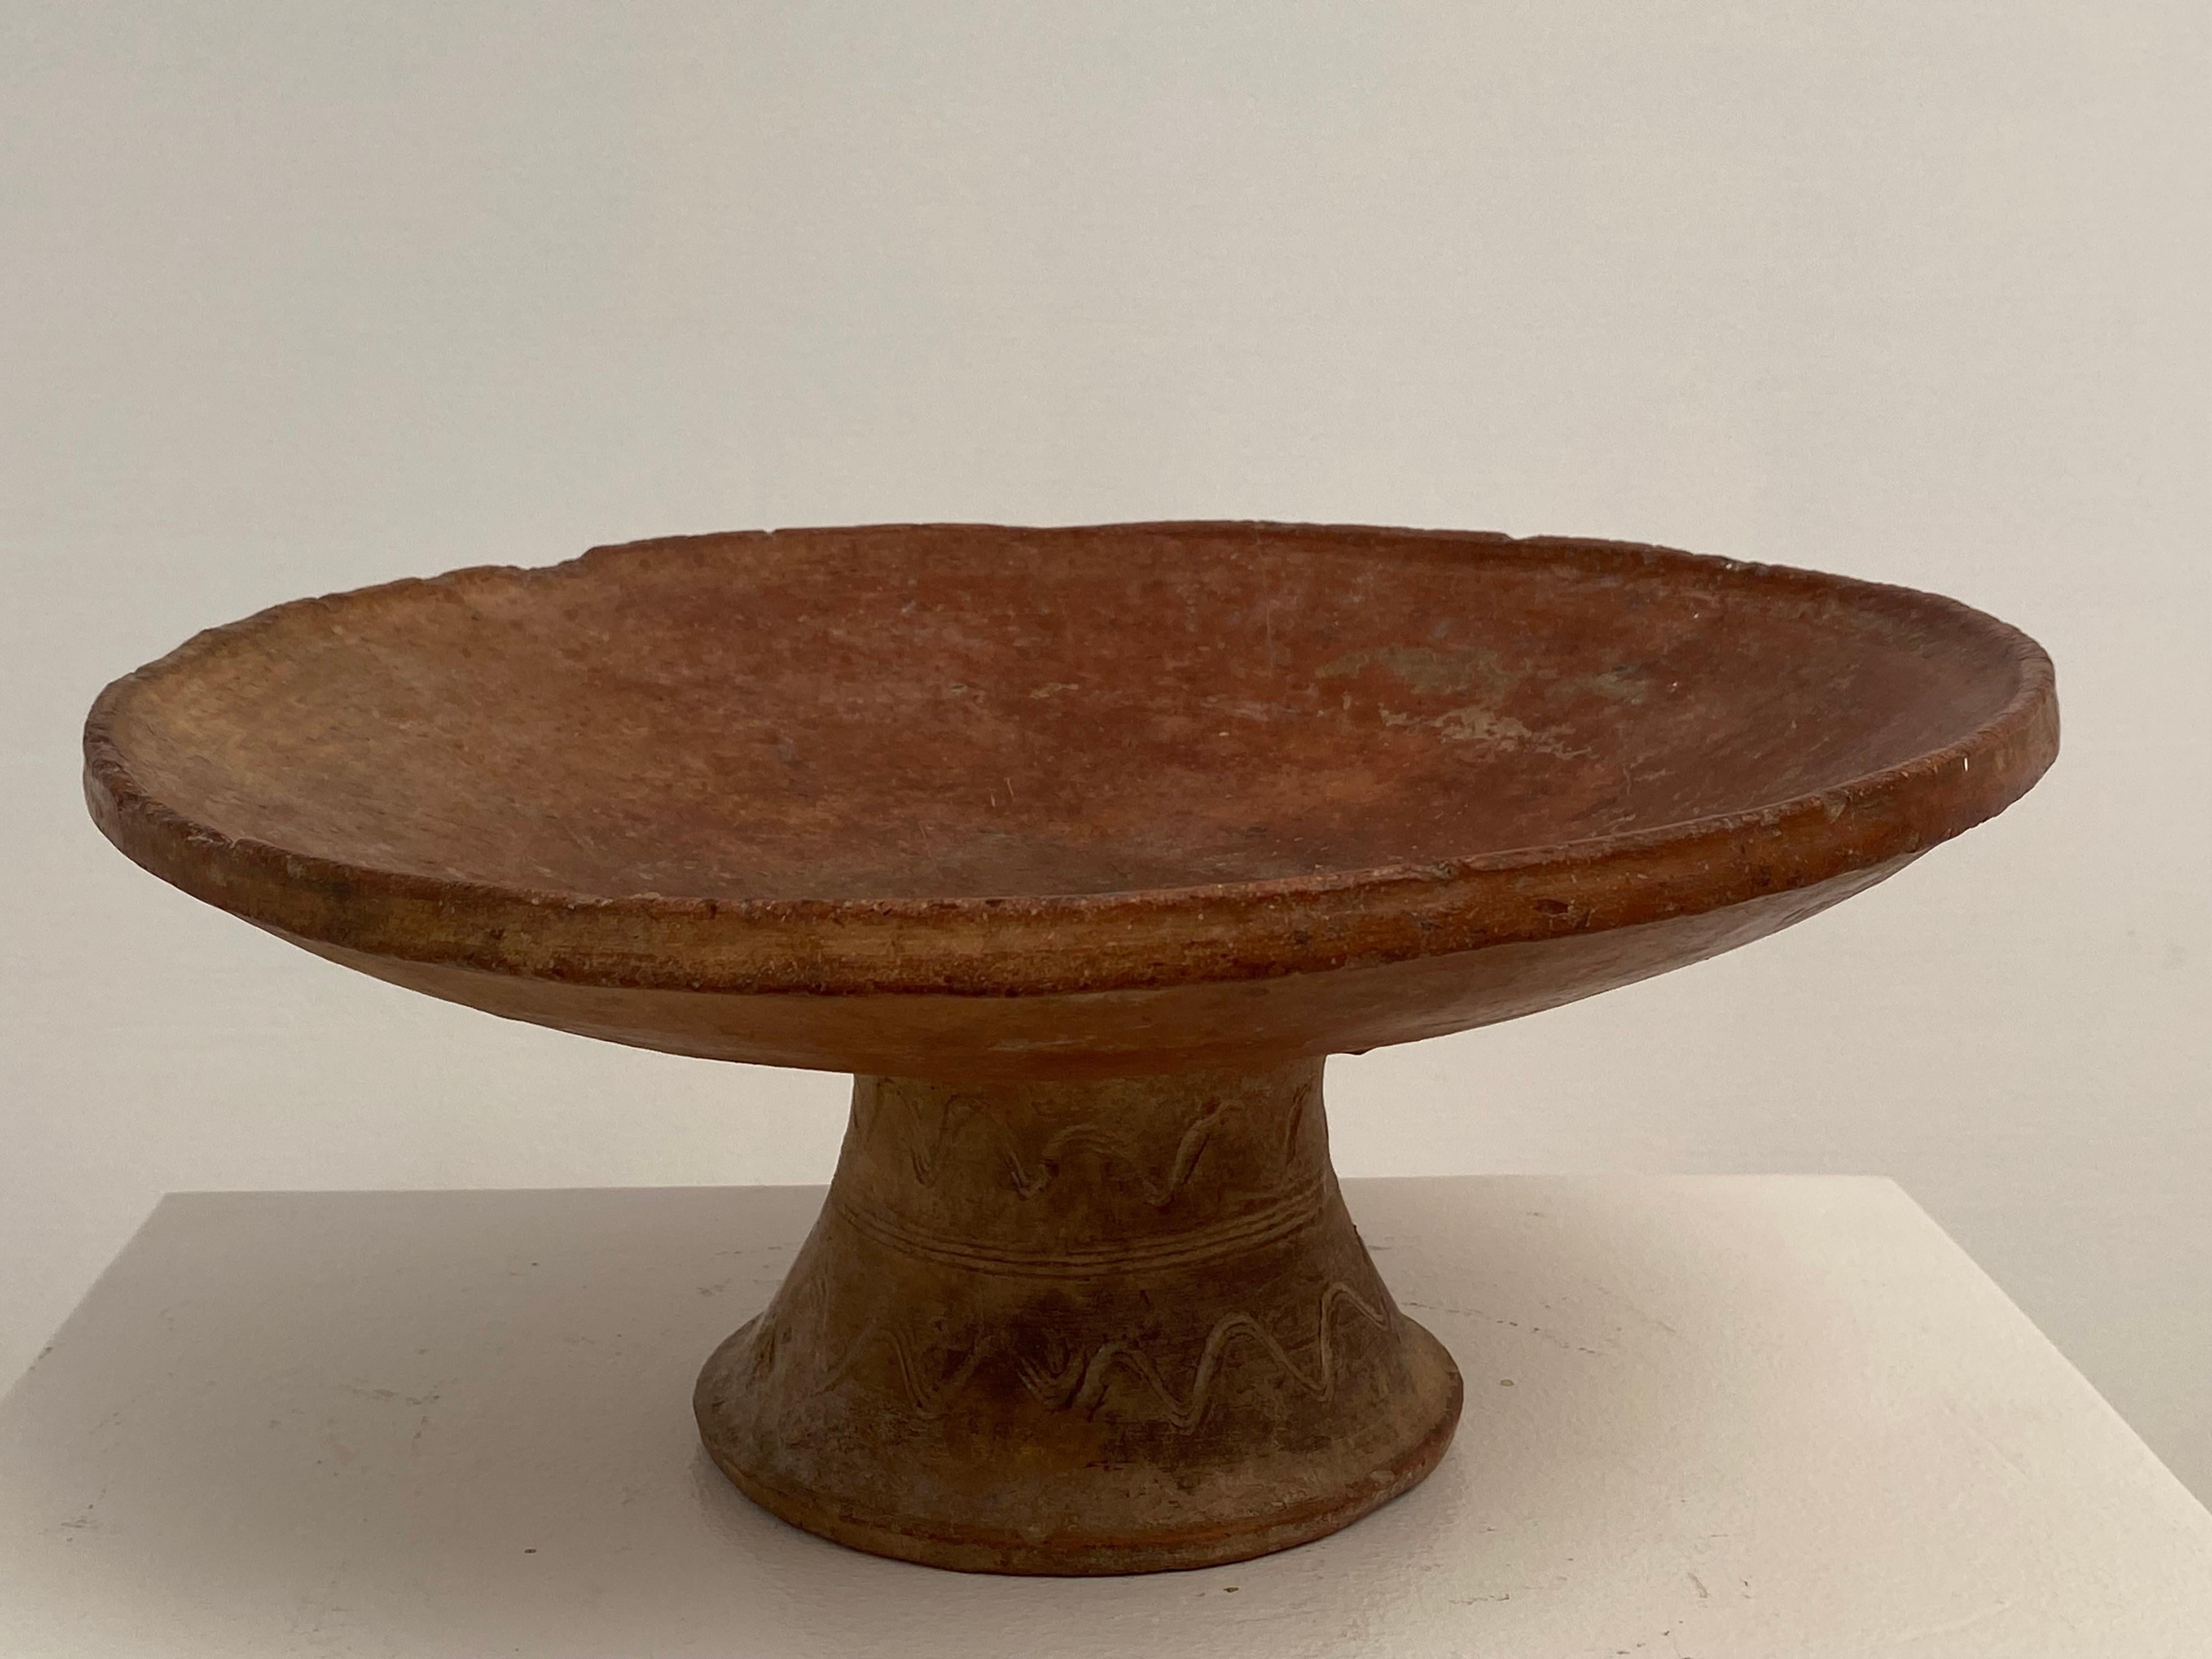 Patinated Antique Berber Terracotta Bowl on a central foot For Sale